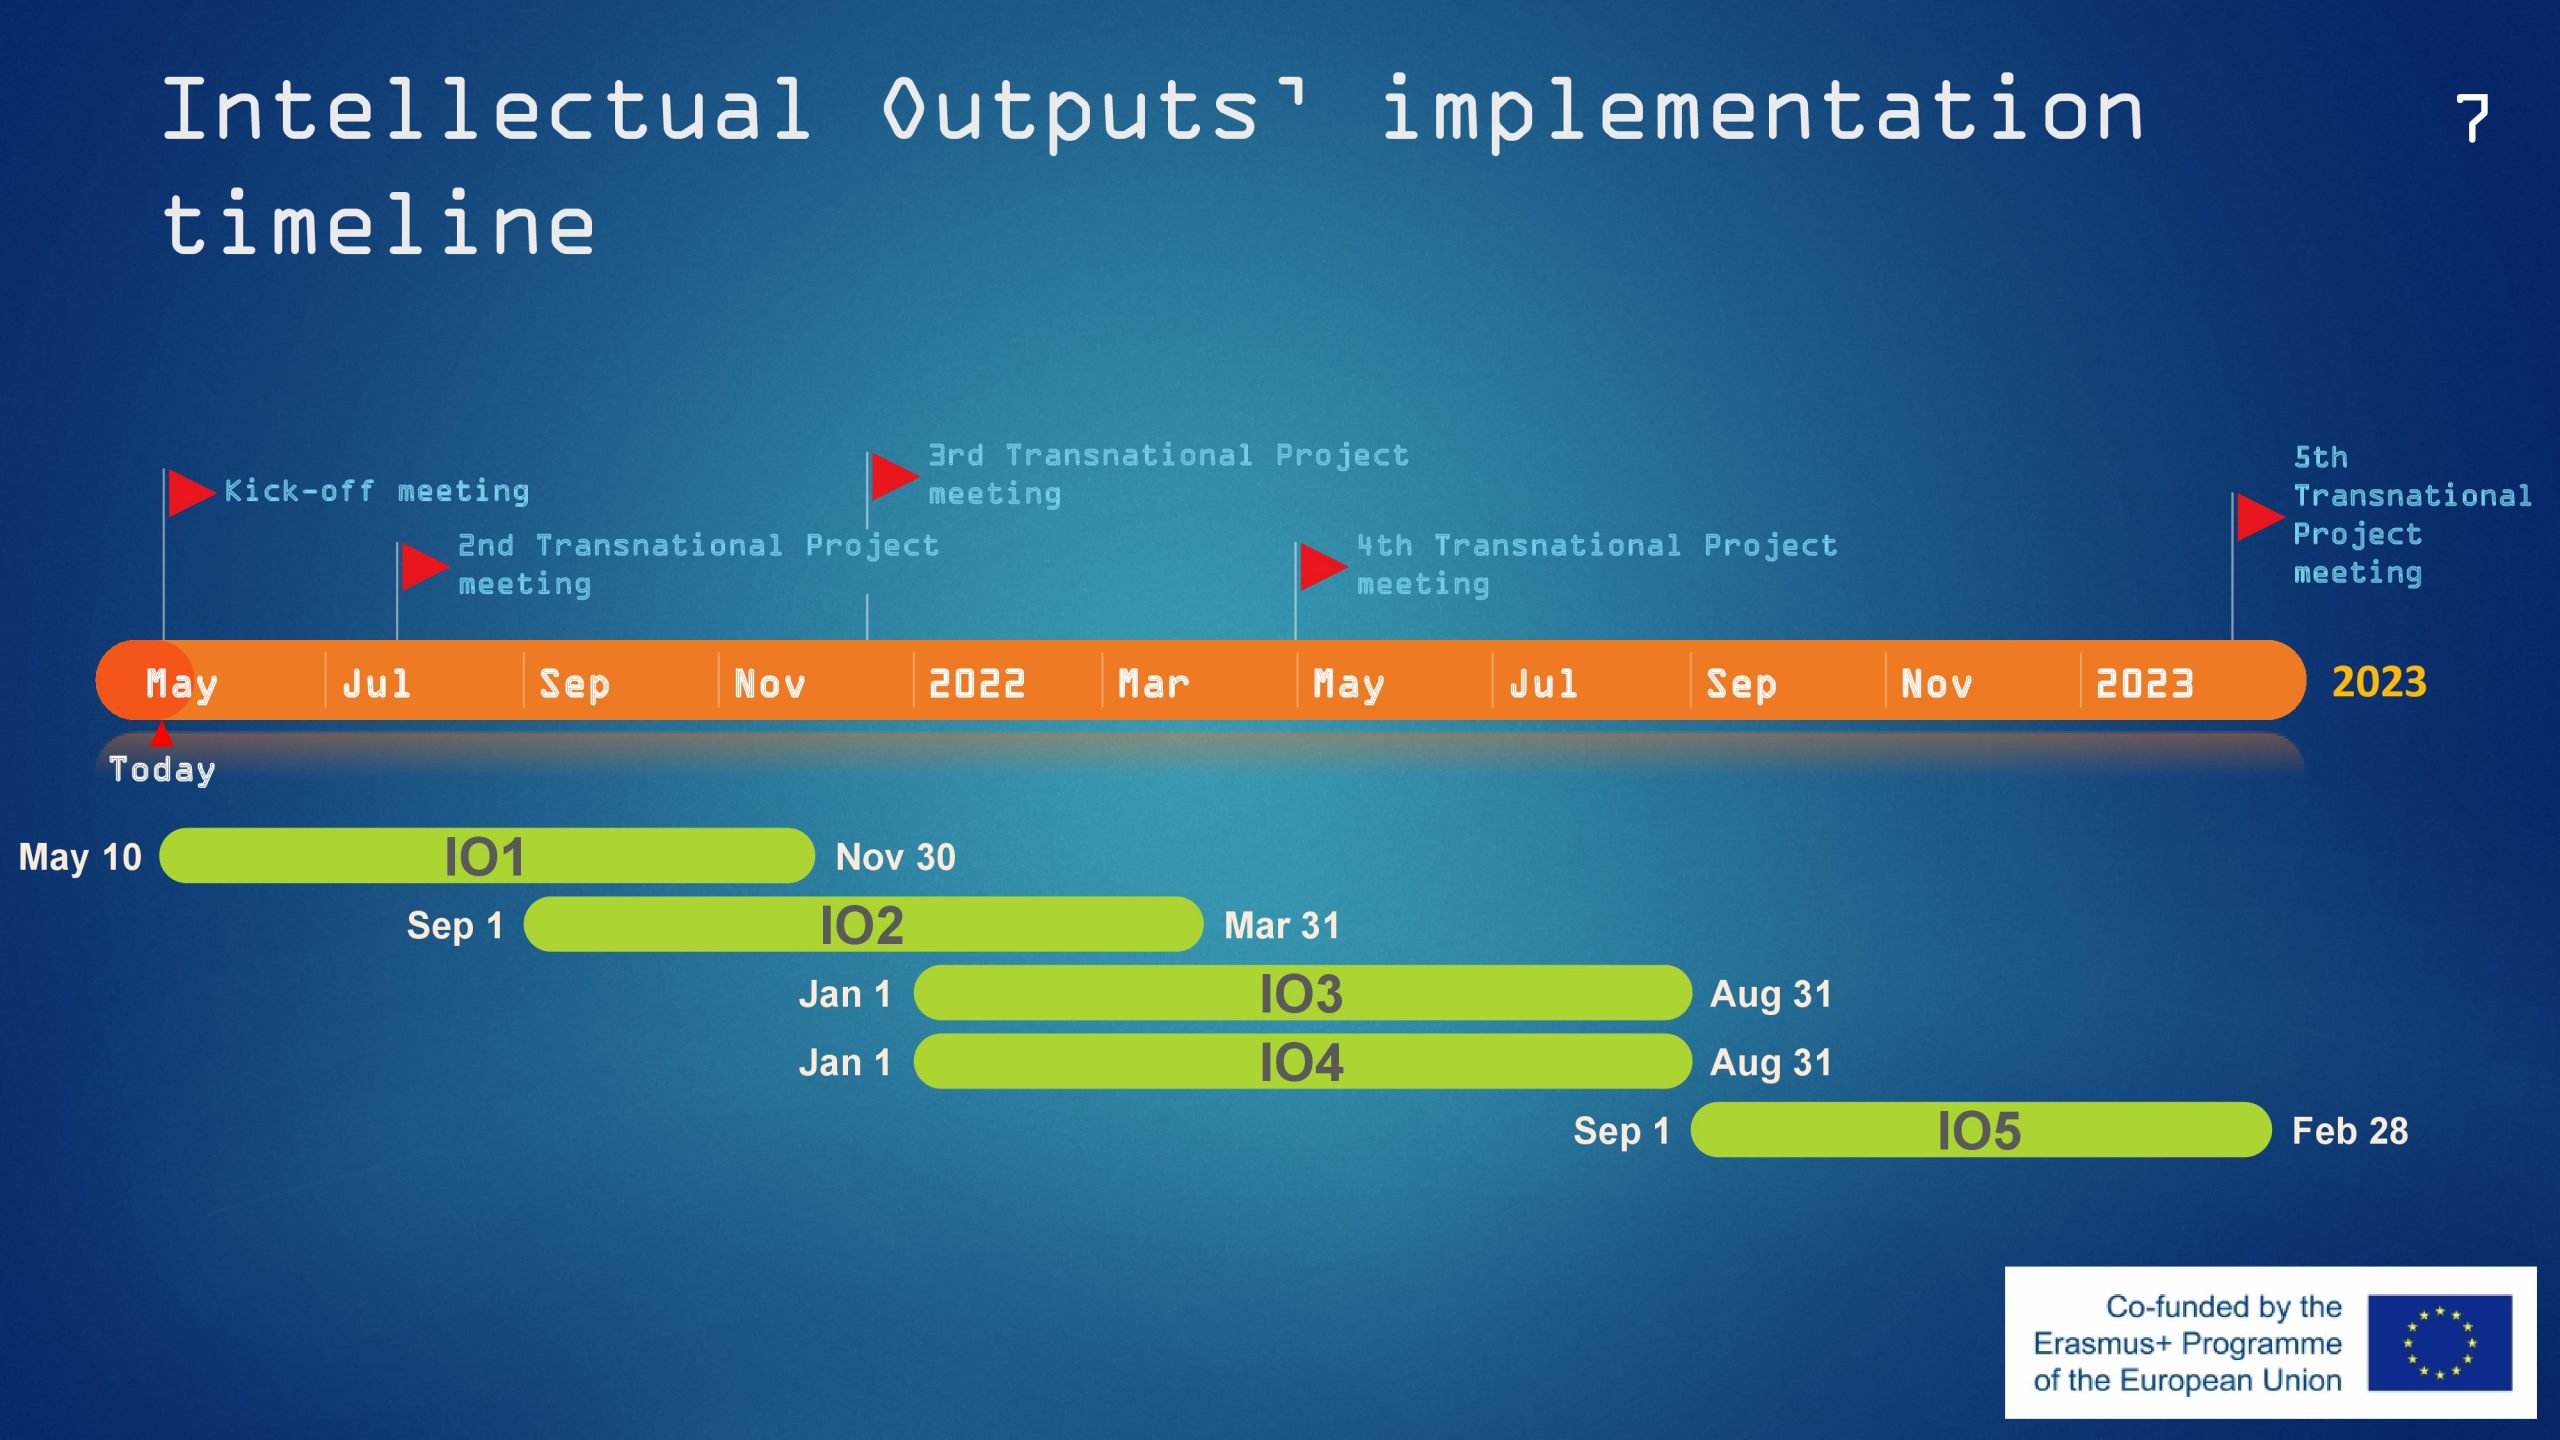 Intellectual outputs imple,mentation timeline ingenious